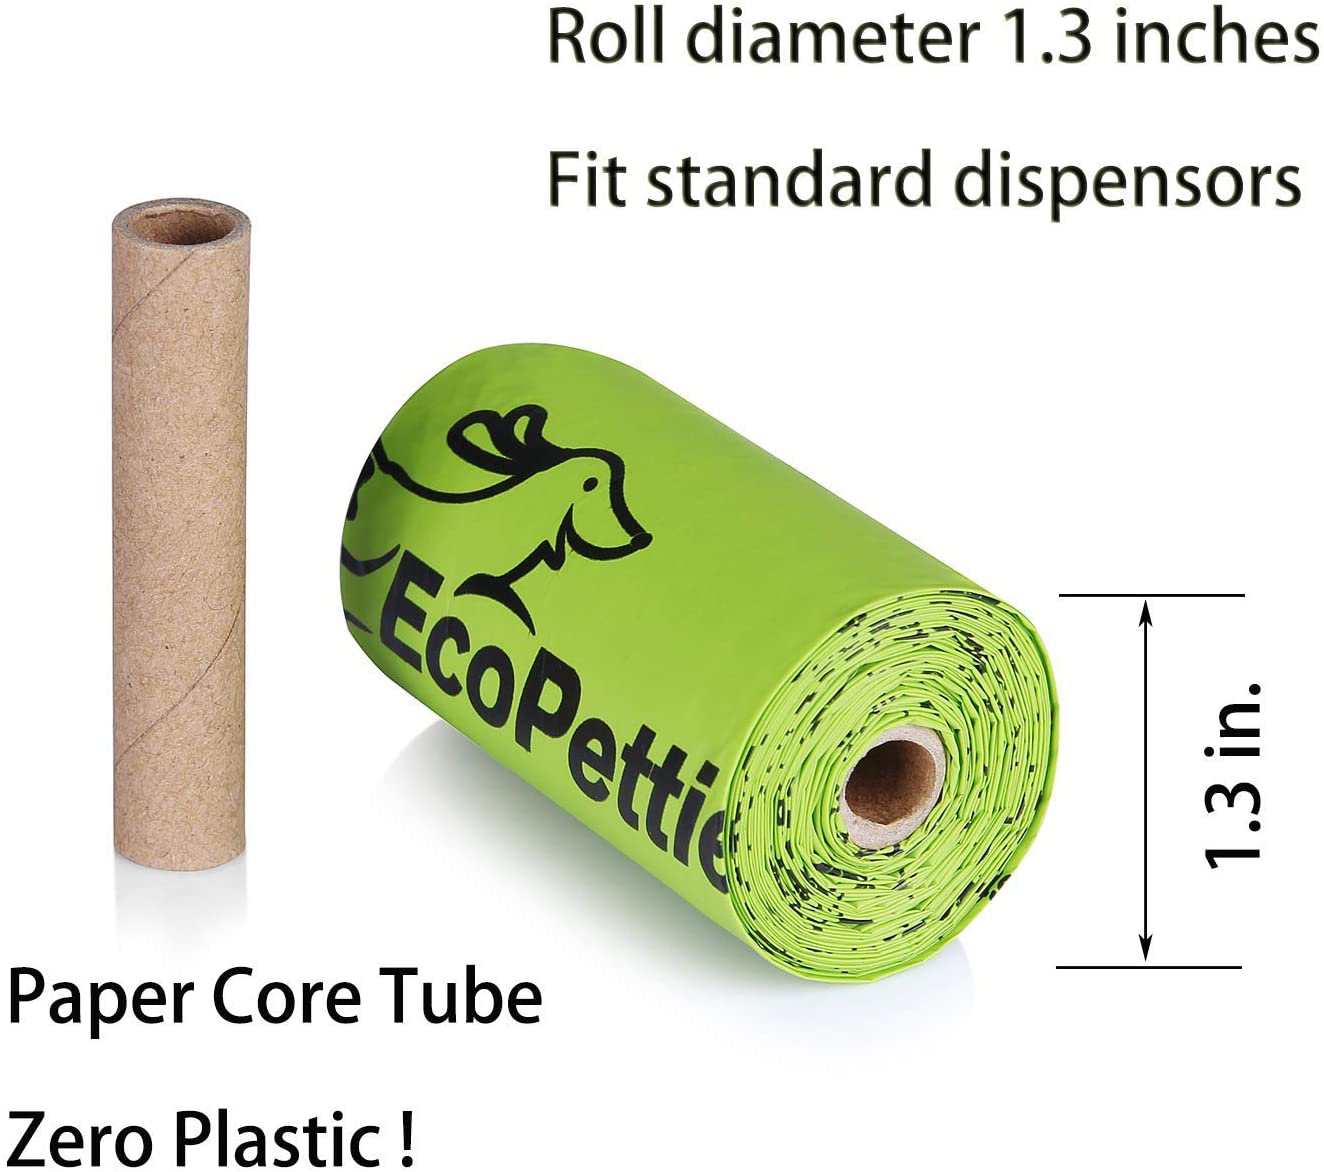 Ecopettie Dog Poop Bag Compostable | Poop Bags for Dogs 100% Biodegradable 18 Rolls 180 Counts | Doggie Bags for Poop | Cat Litter Bags for Cleaning (3 Months Volume,Xl ) Green Animals & Pet Supplies > Pet Supplies > Cat Supplies > Cat Litter Box Liners EcoPettie   